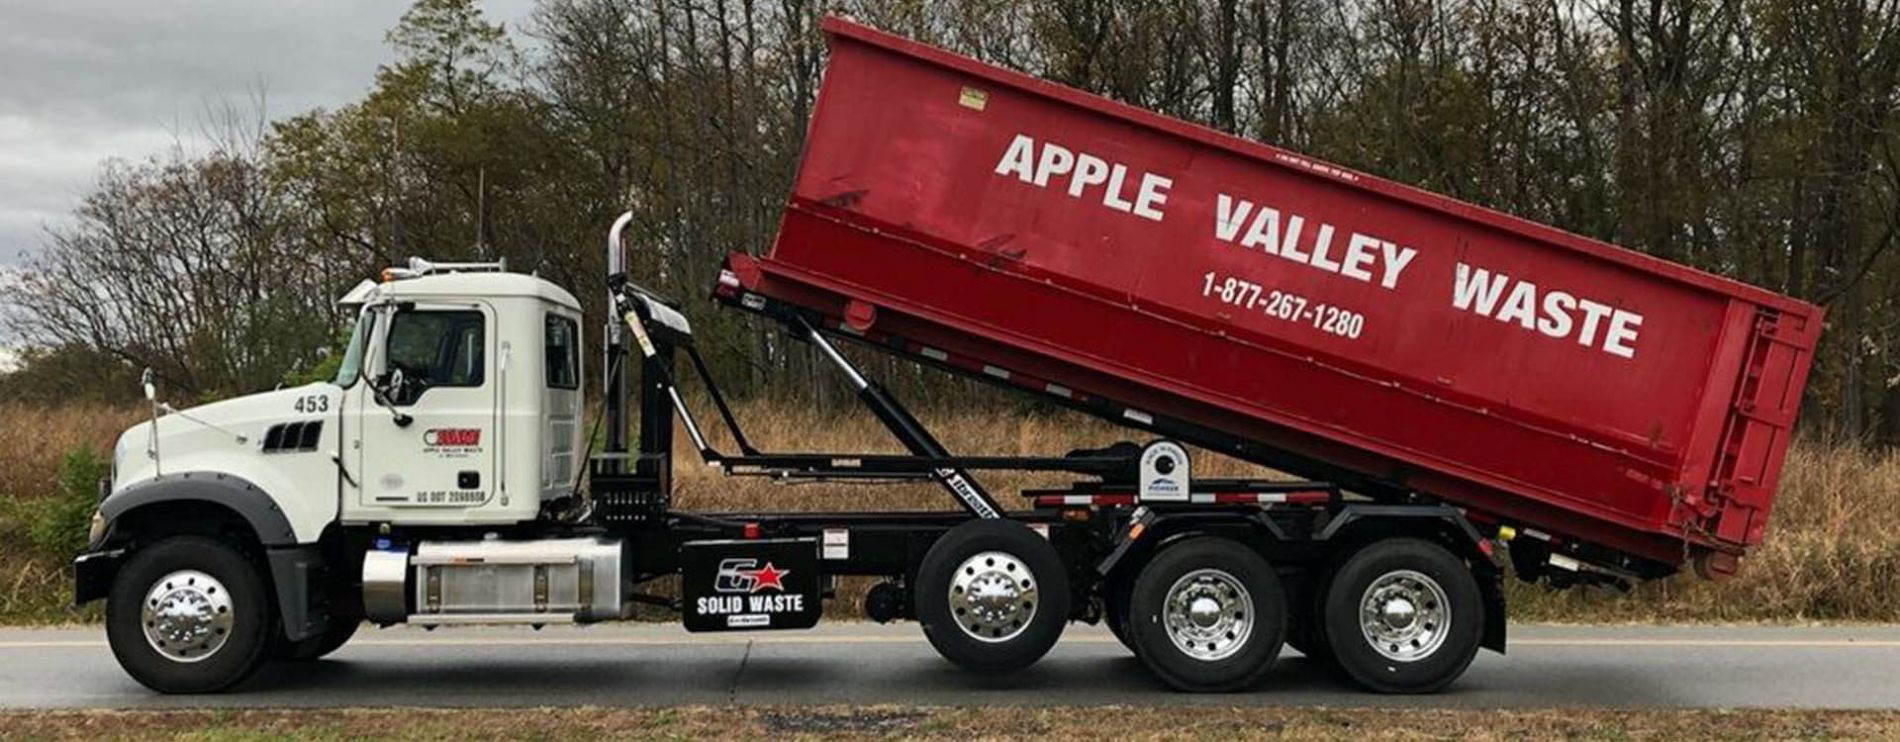 Apple Valley Waste Roll Off truck and container.